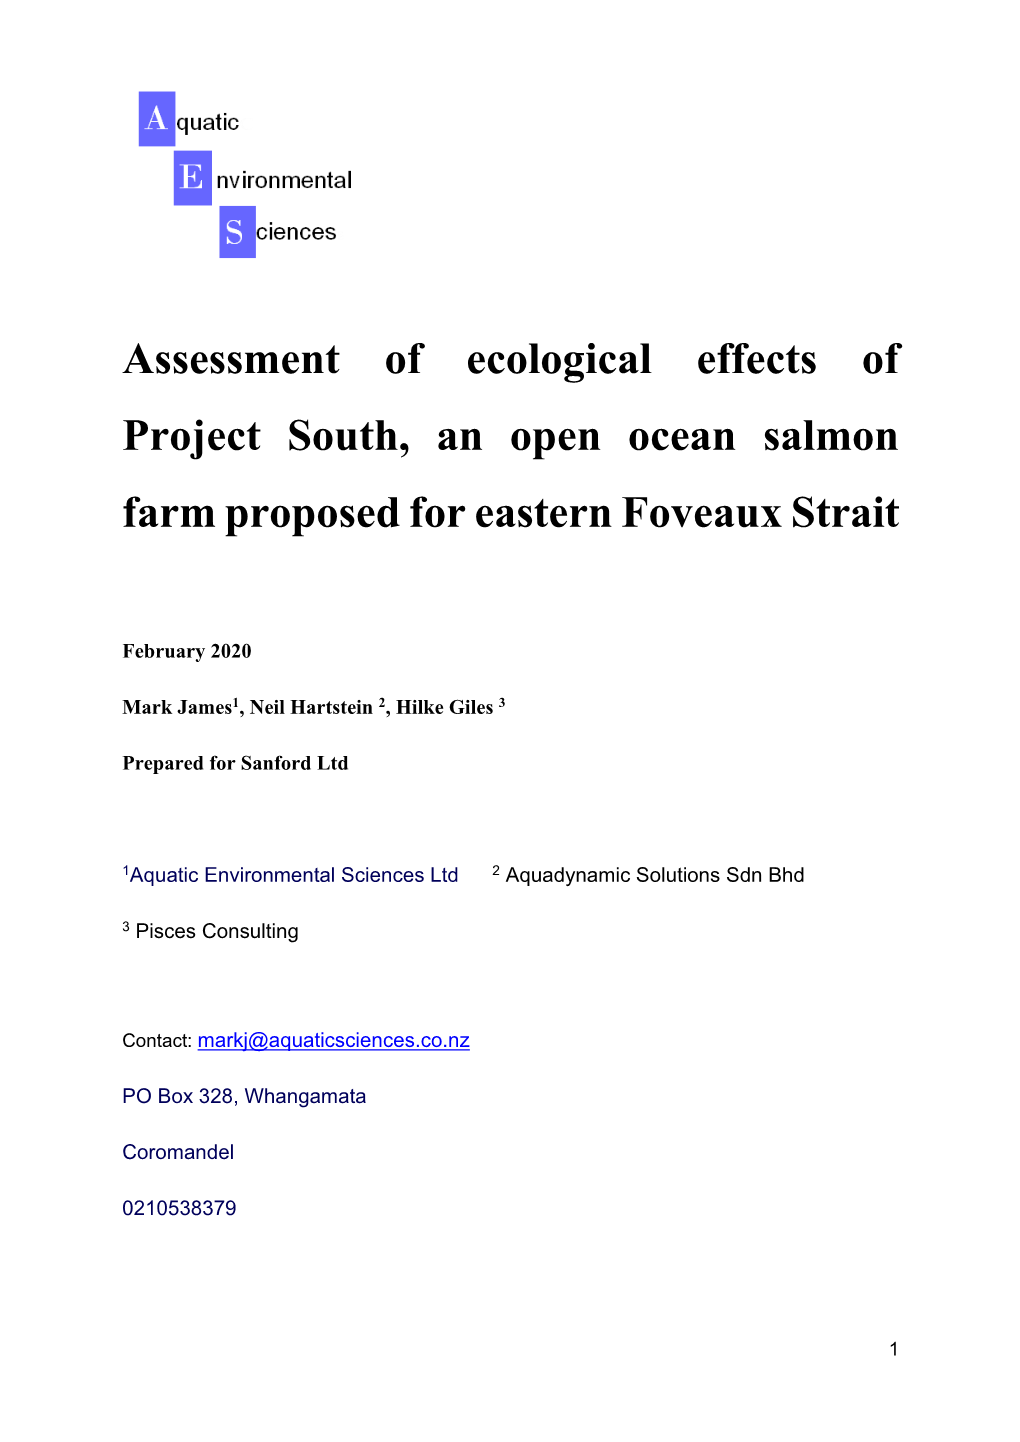 Ecological Effects of Project South, an Open Ocean Salmon Farm Proposed for Eastern Foveaux Strait